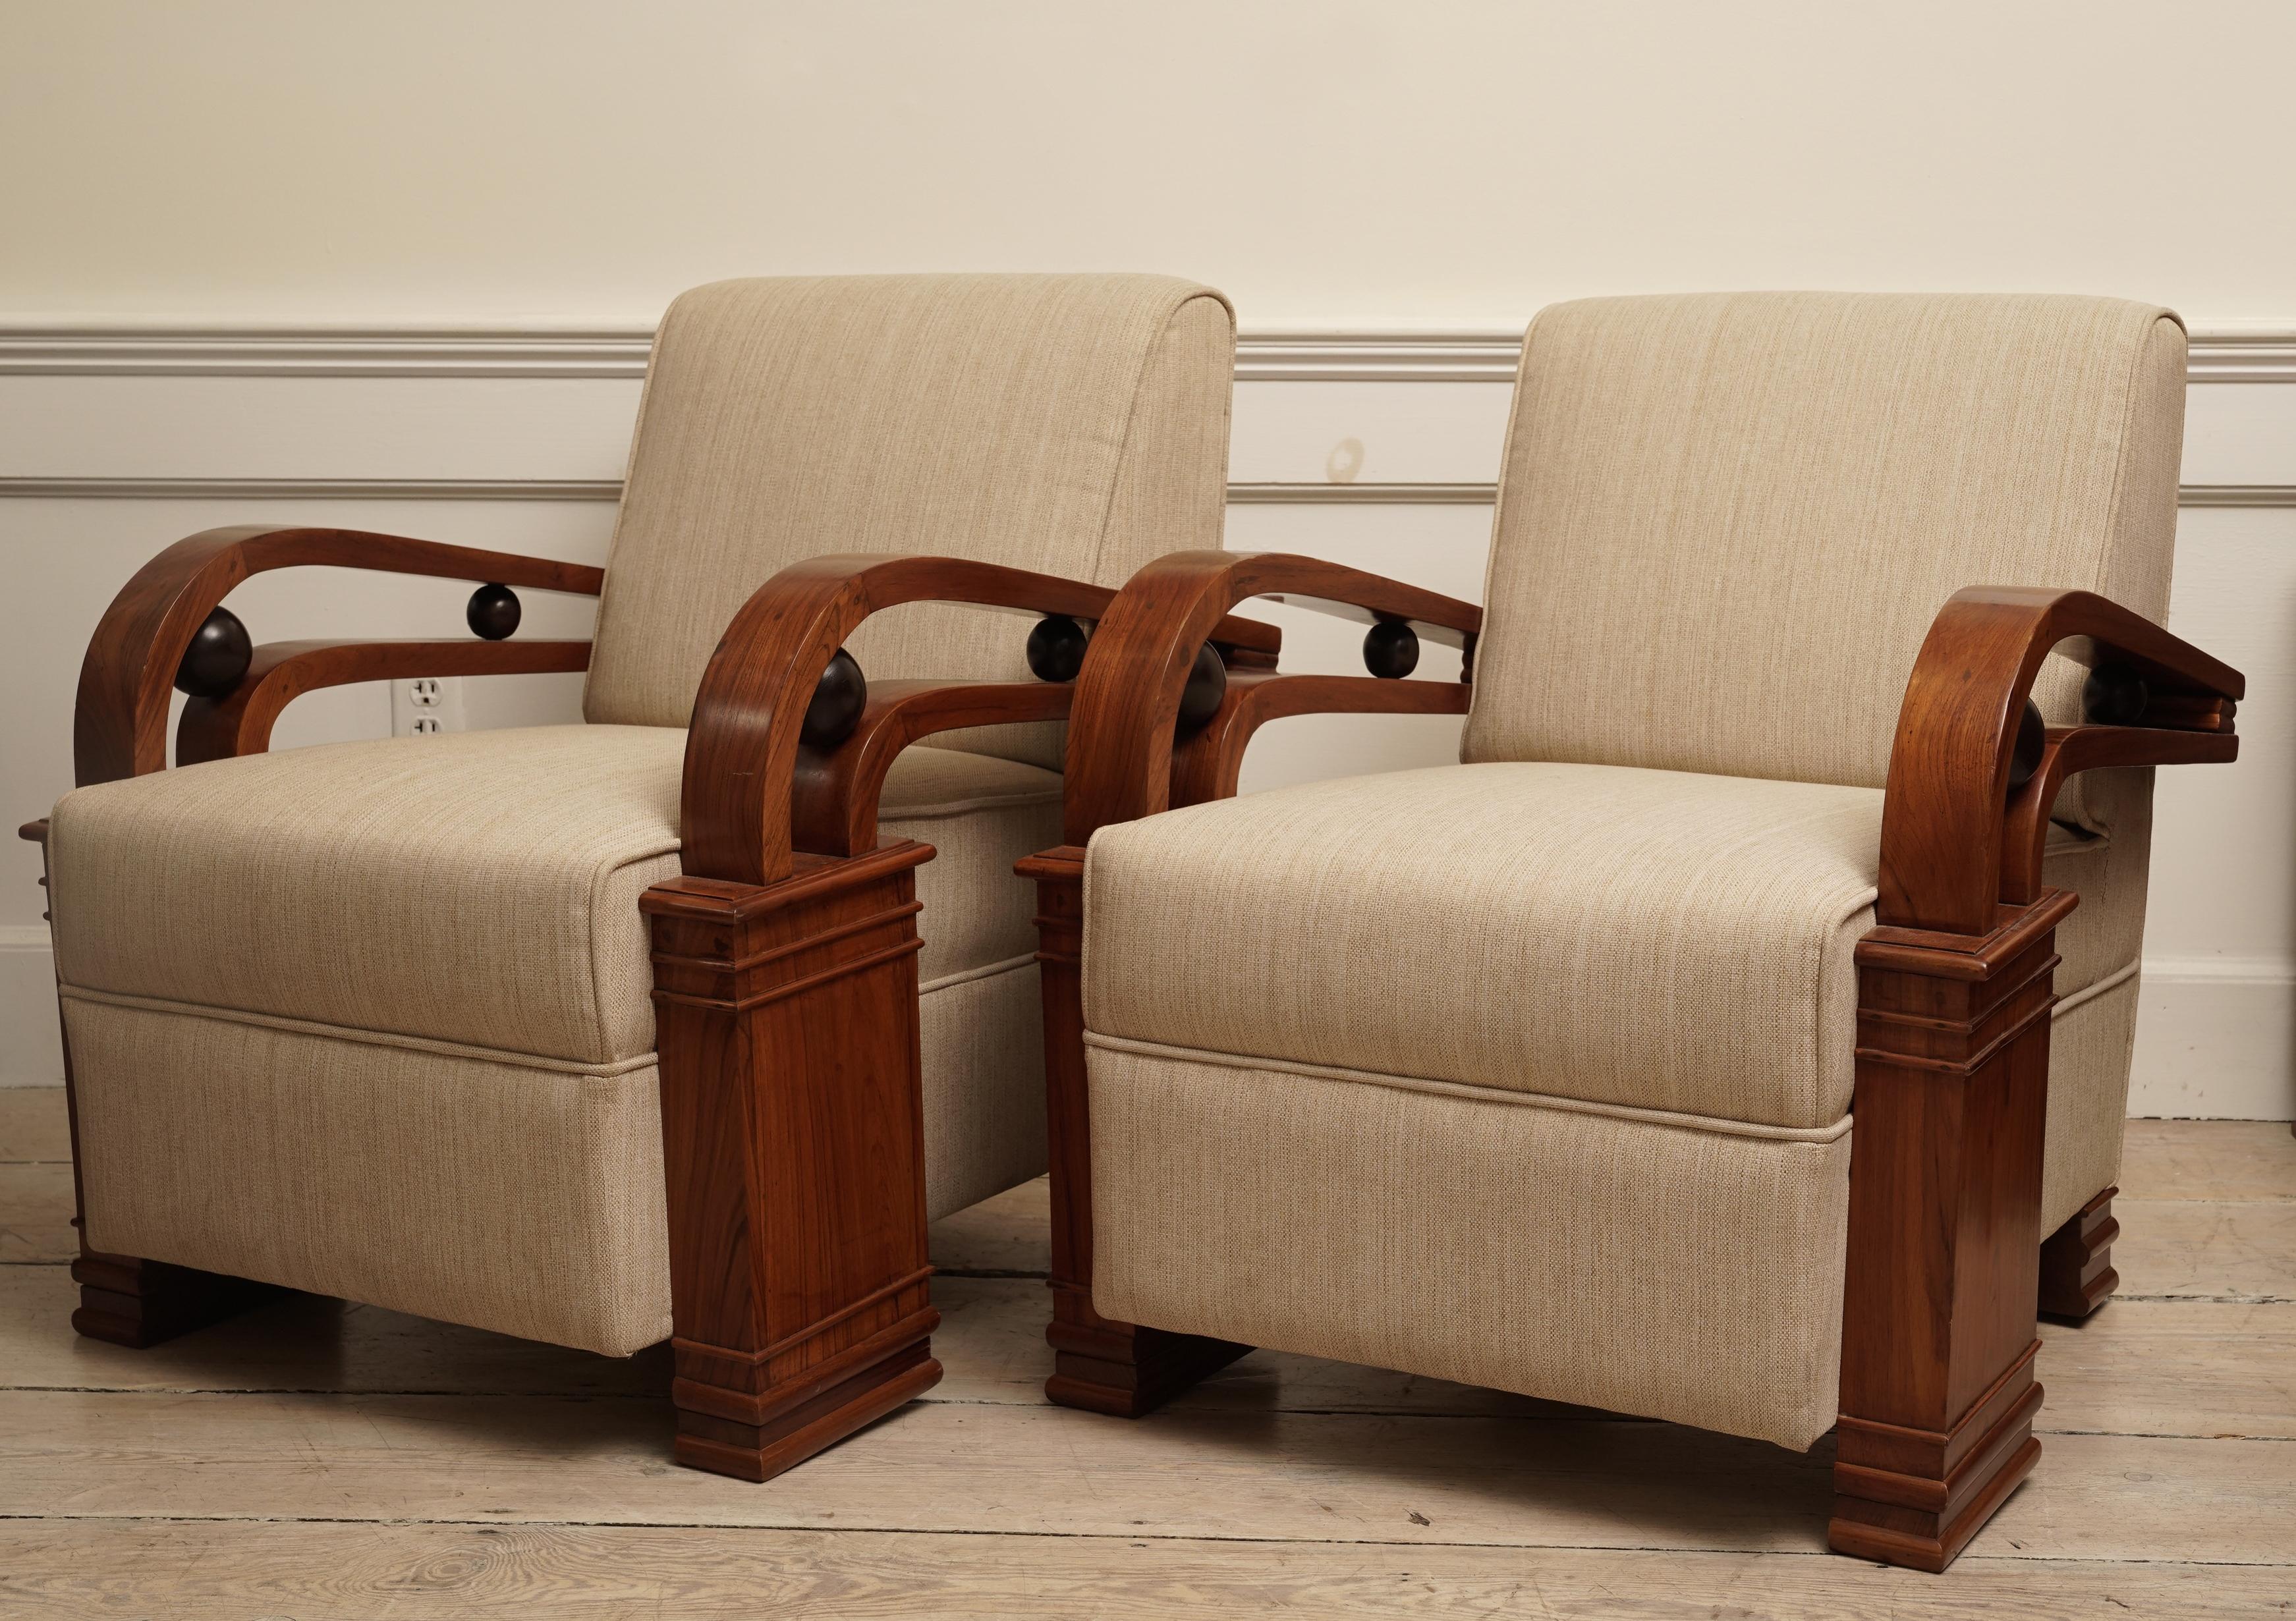 A handsome and stylish Art Deco seating suite comprised of a love seat and pair of club chairs.  Typical of the Art Deco style, the set features elegant and sweeping sides and the architectural element of the two parallel arms in teak wood with